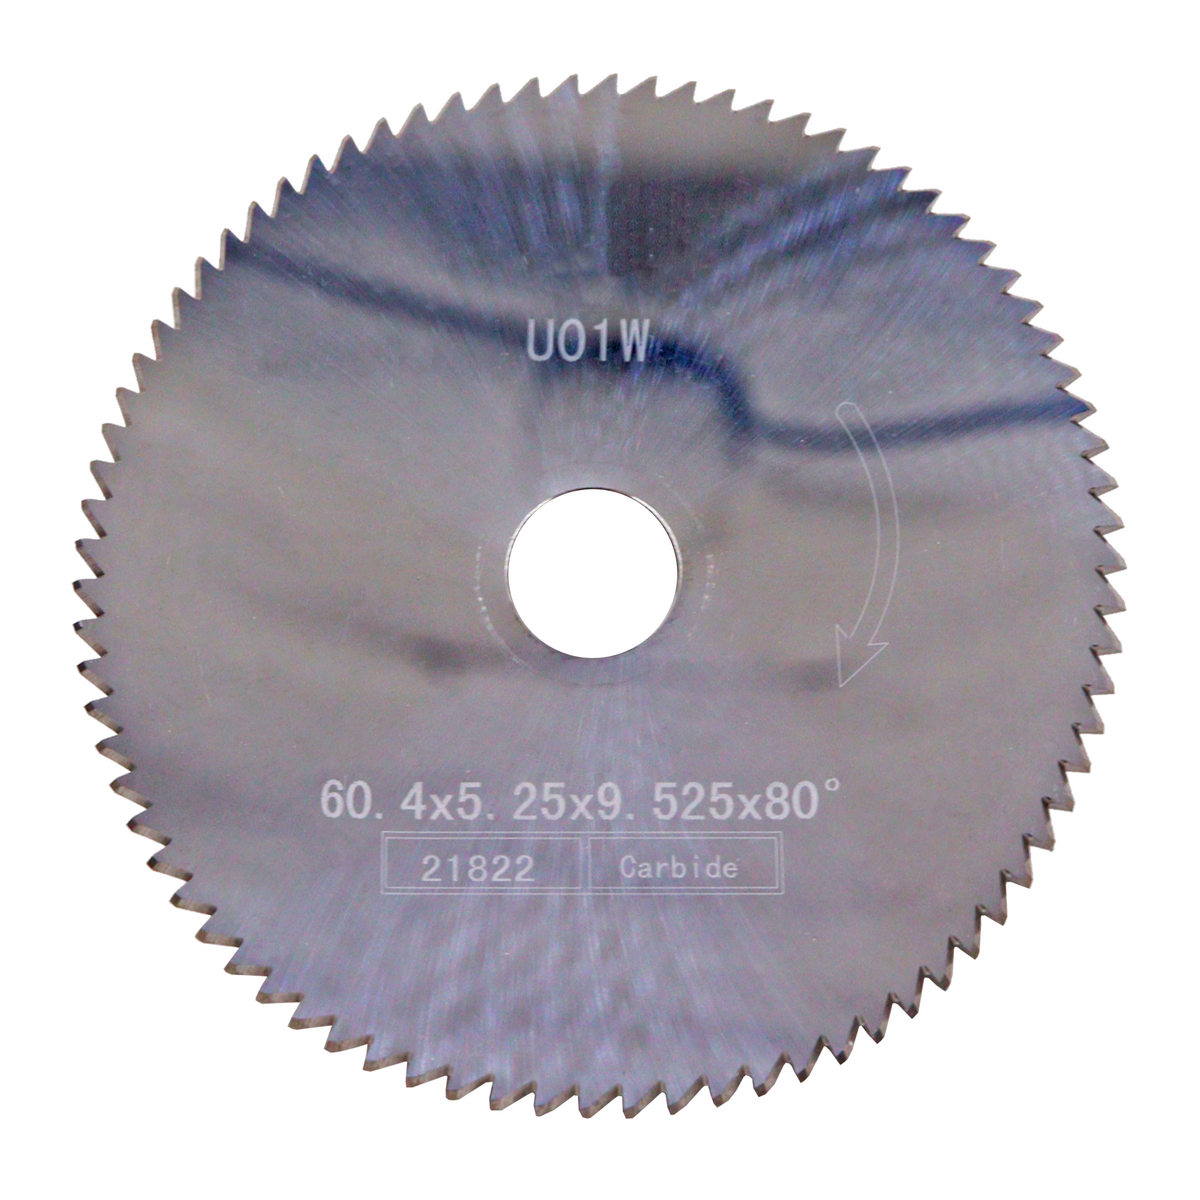 Steel Double Angle Milling Cutter U01W Carbide To Suit Unocode